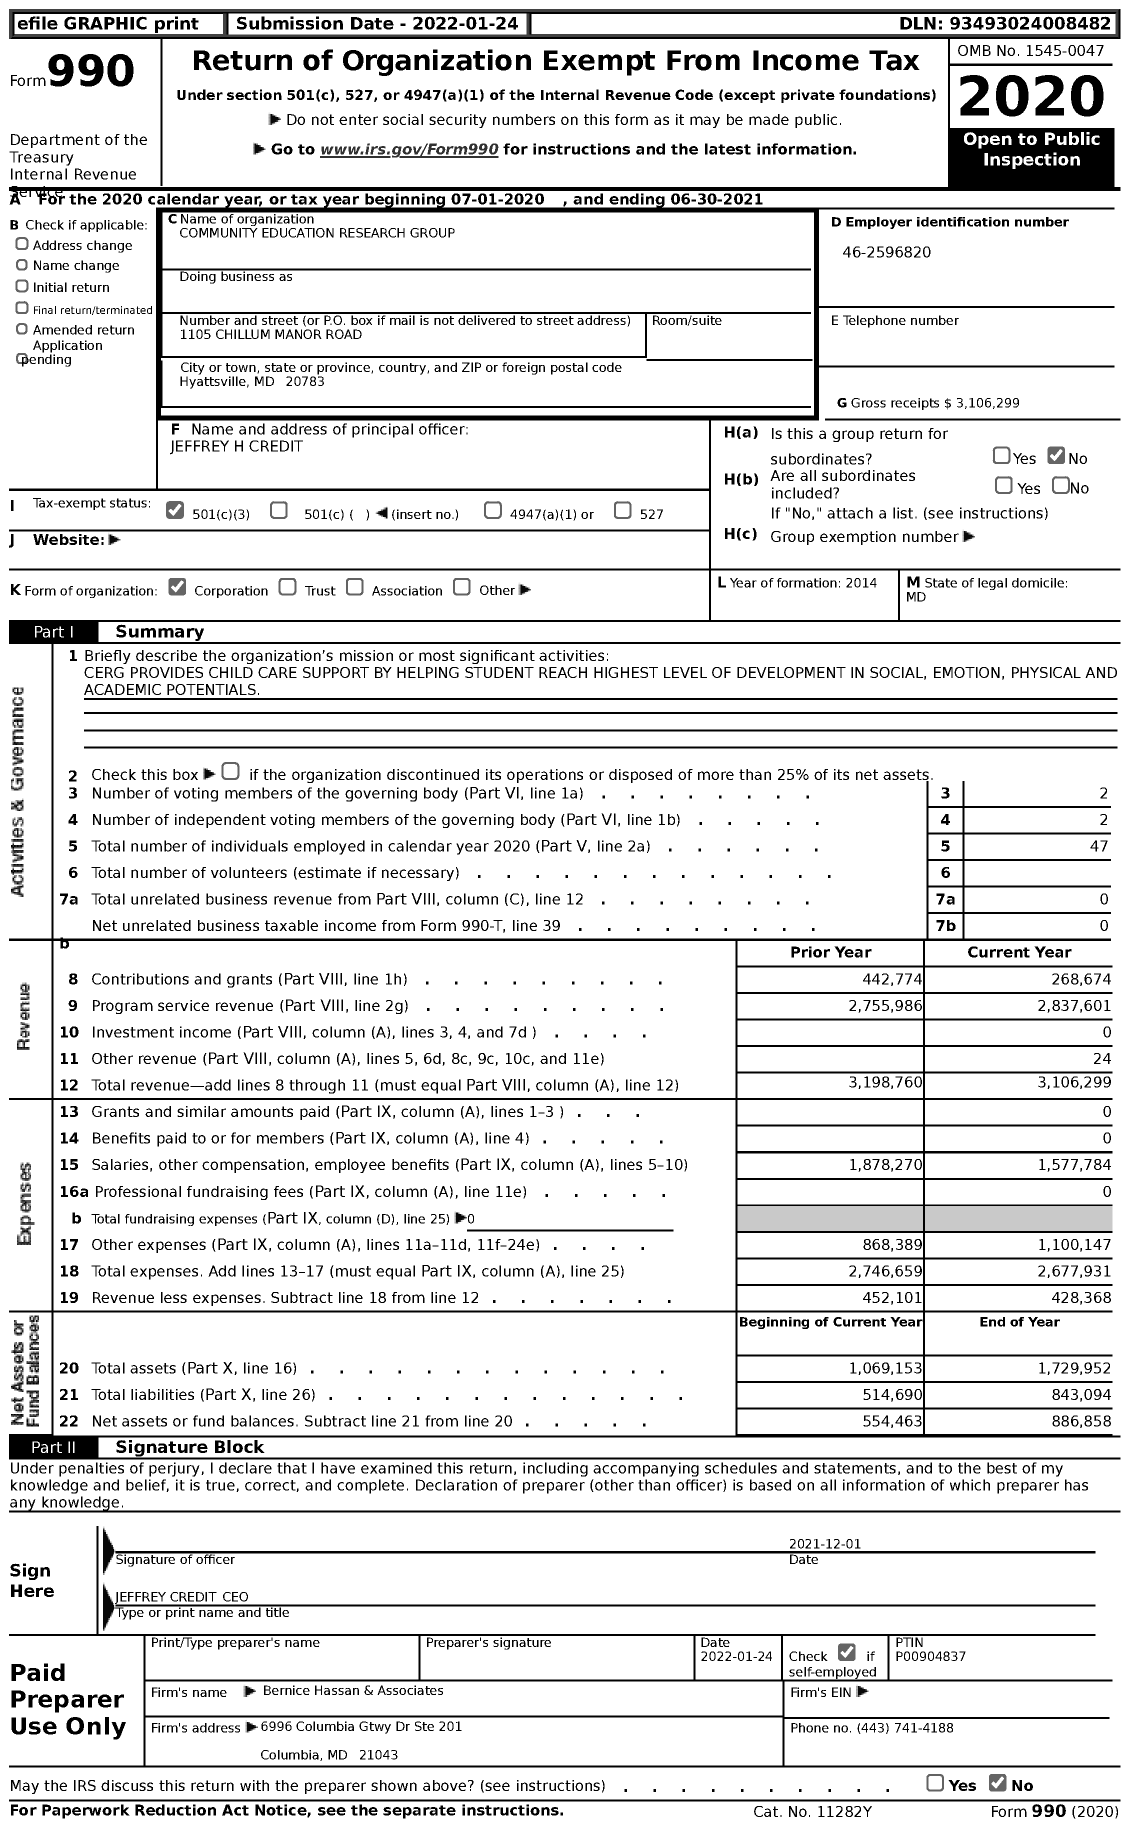 Image of first page of 2020 Form 990 for Community Educational Research Group (CERG)